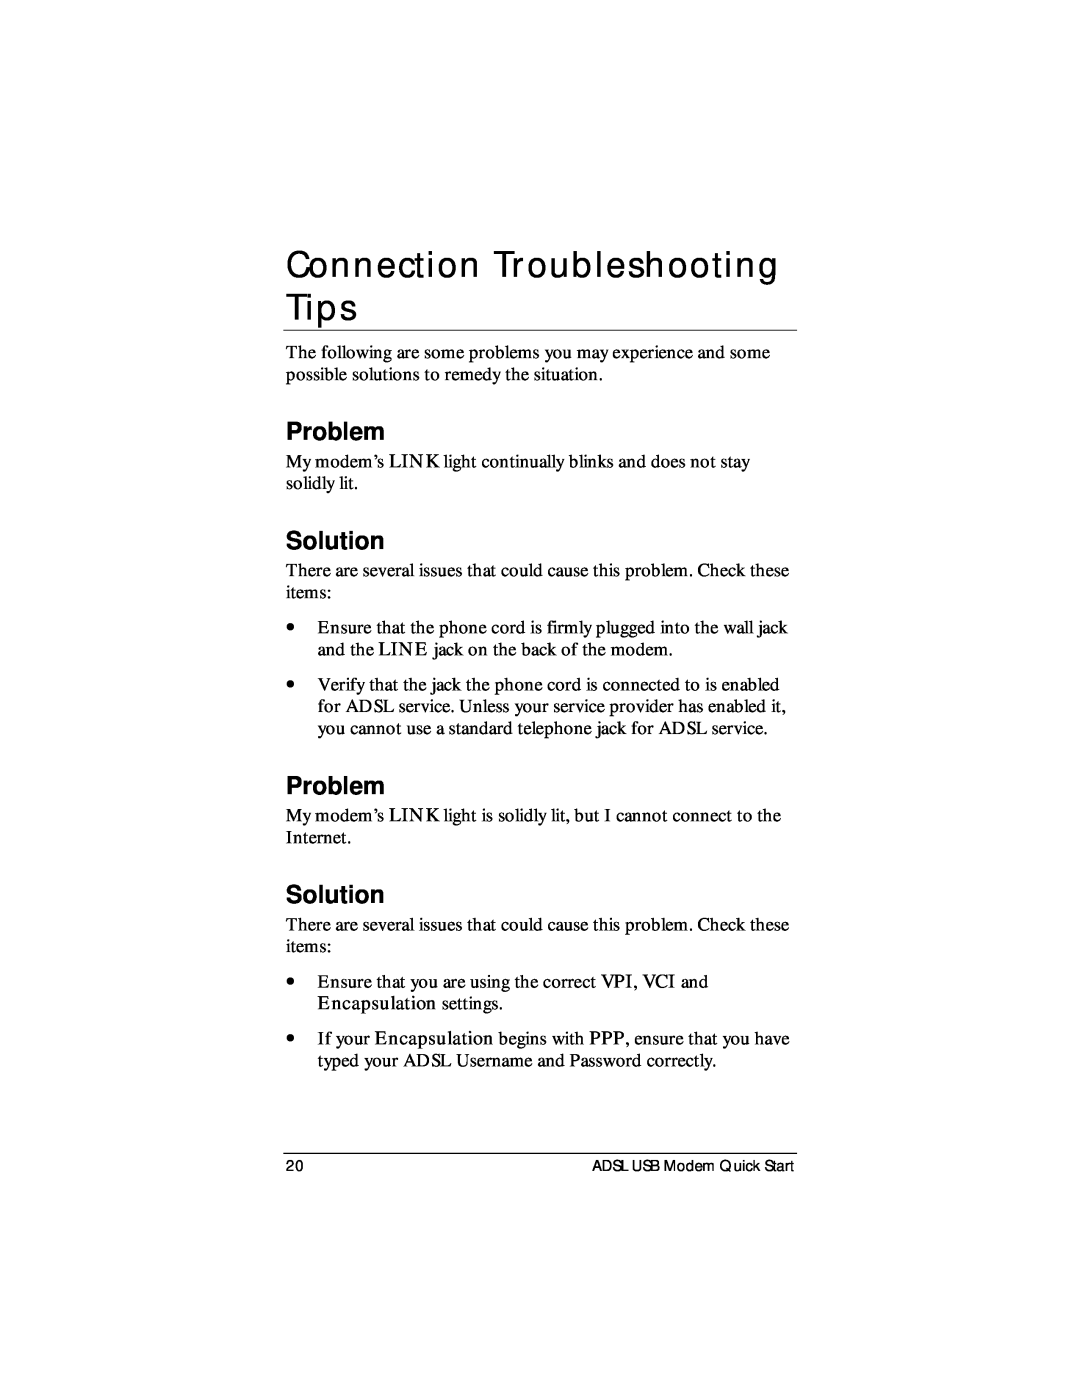 Zoom None quick start Connection Troubleshooting Tips, Problem, Solution 